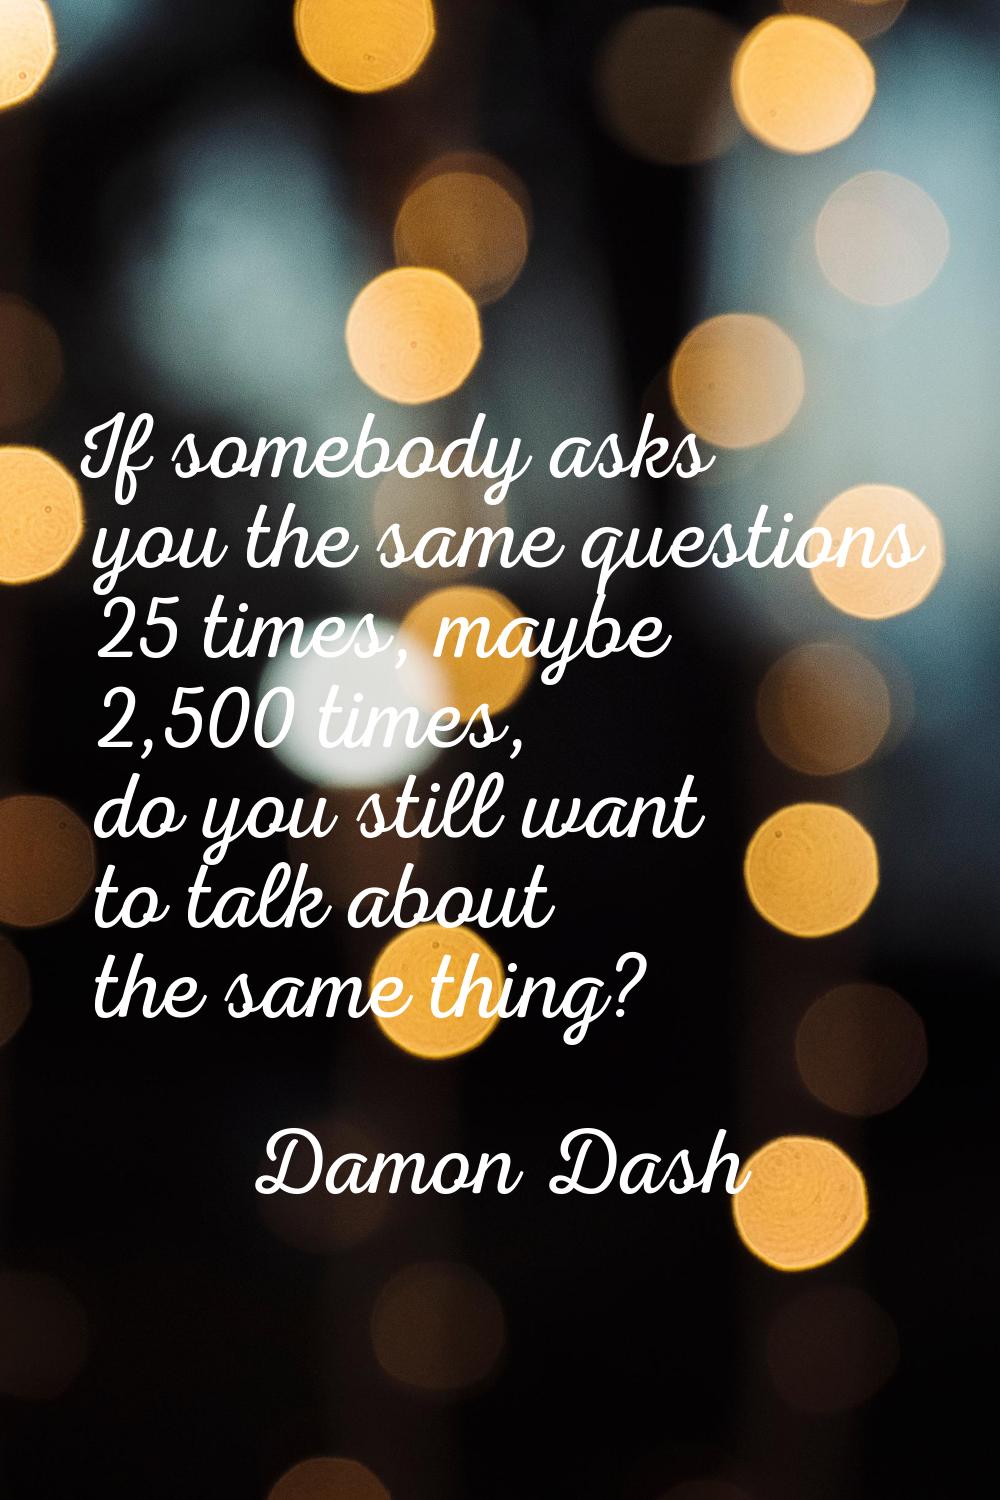 If somebody asks you the same questions 25 times, maybe 2,500 times, do you still want to talk abou